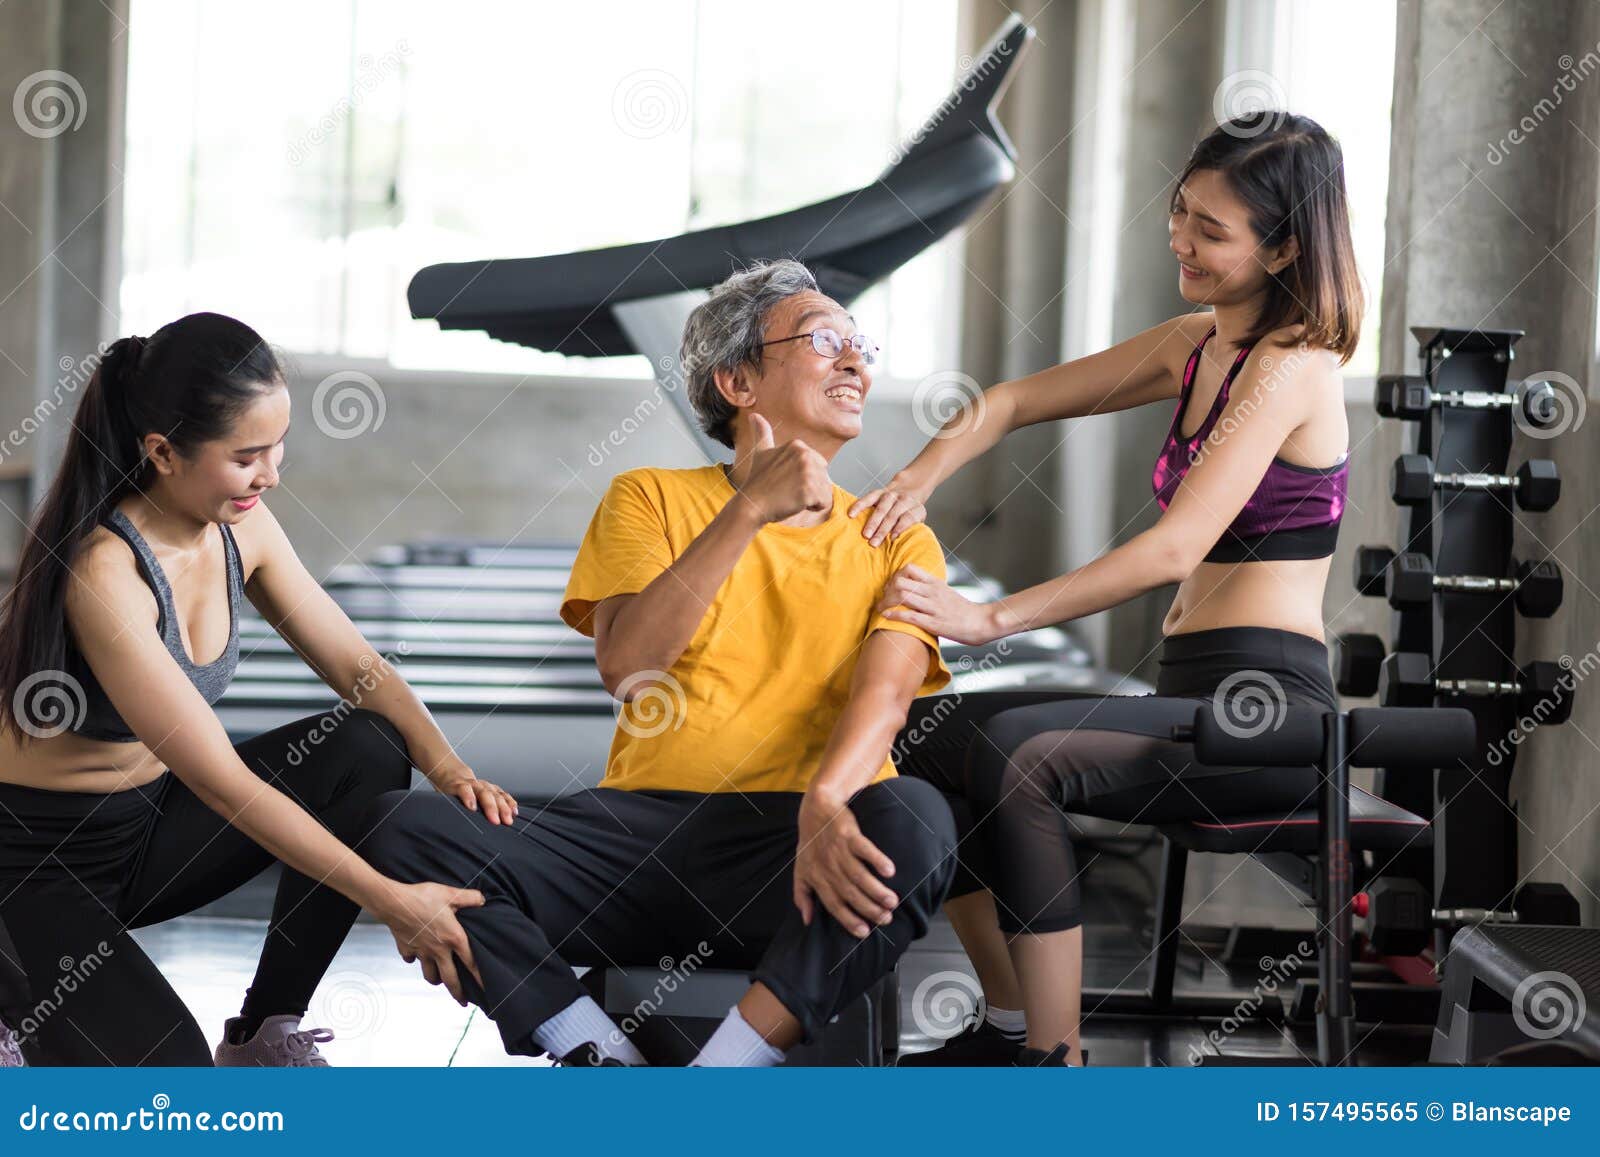 Old Man Get Massage After Work Out In Gym Stock Image Image Of Female Copy 157495565